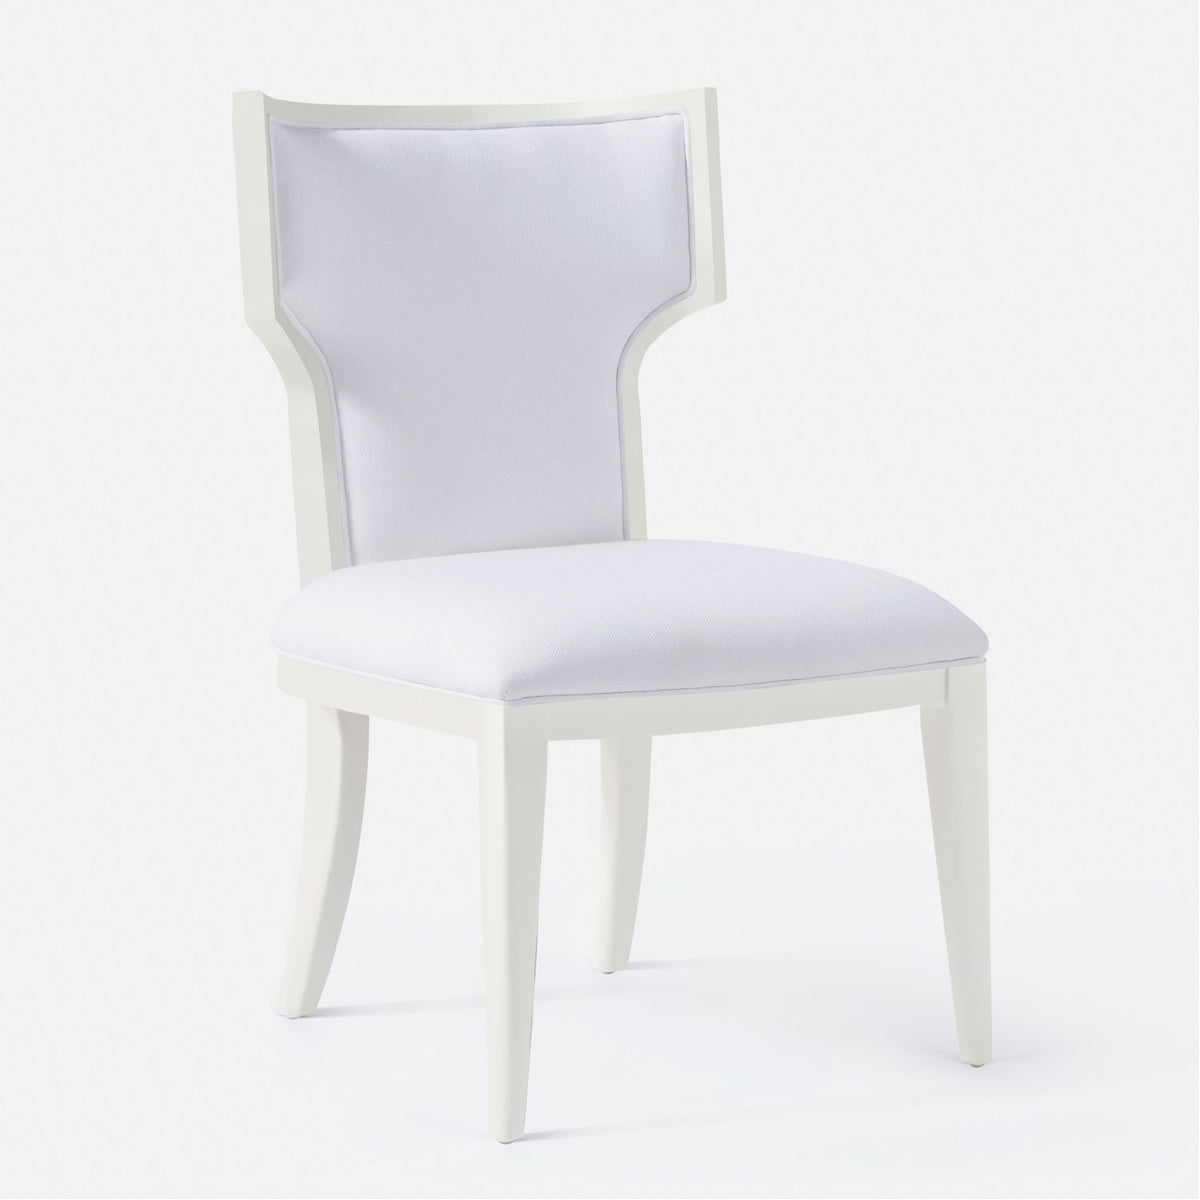 Made Goods Carleen Wingback Dining Chair in Aras Mohair